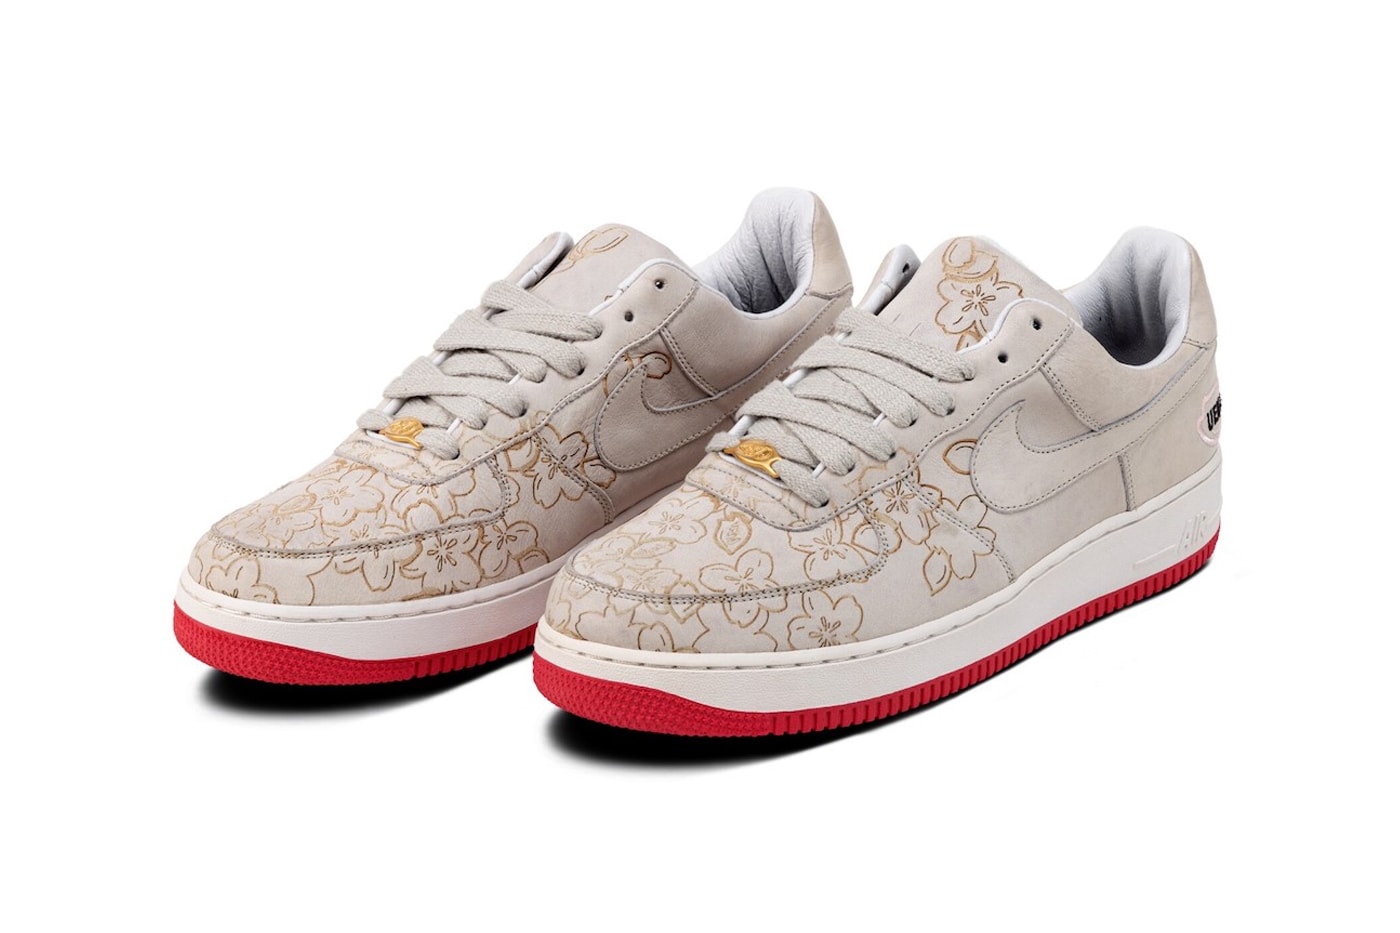 This Nike Air Force 1 Low Worldwide Is Covered In Katakana Logos